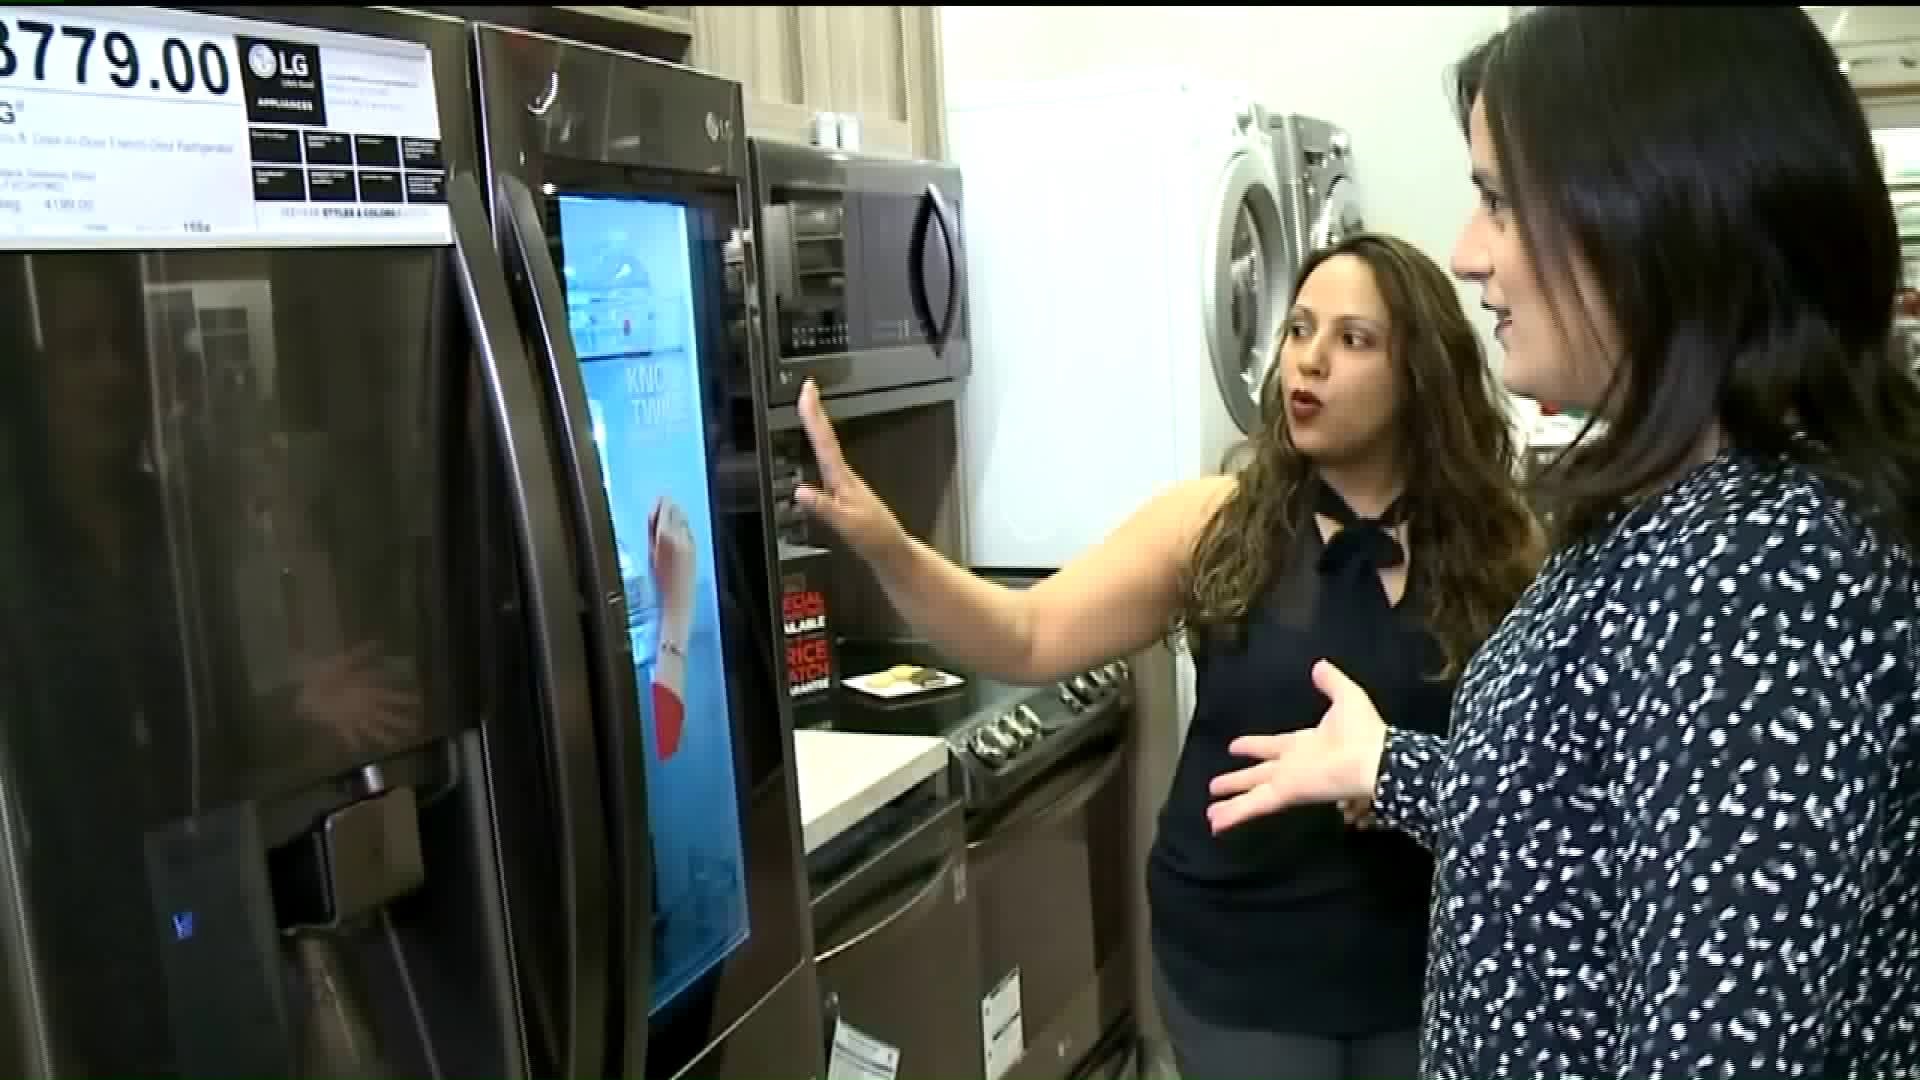 JCPenney Debuts Appliance Showroom at Stroud Mall